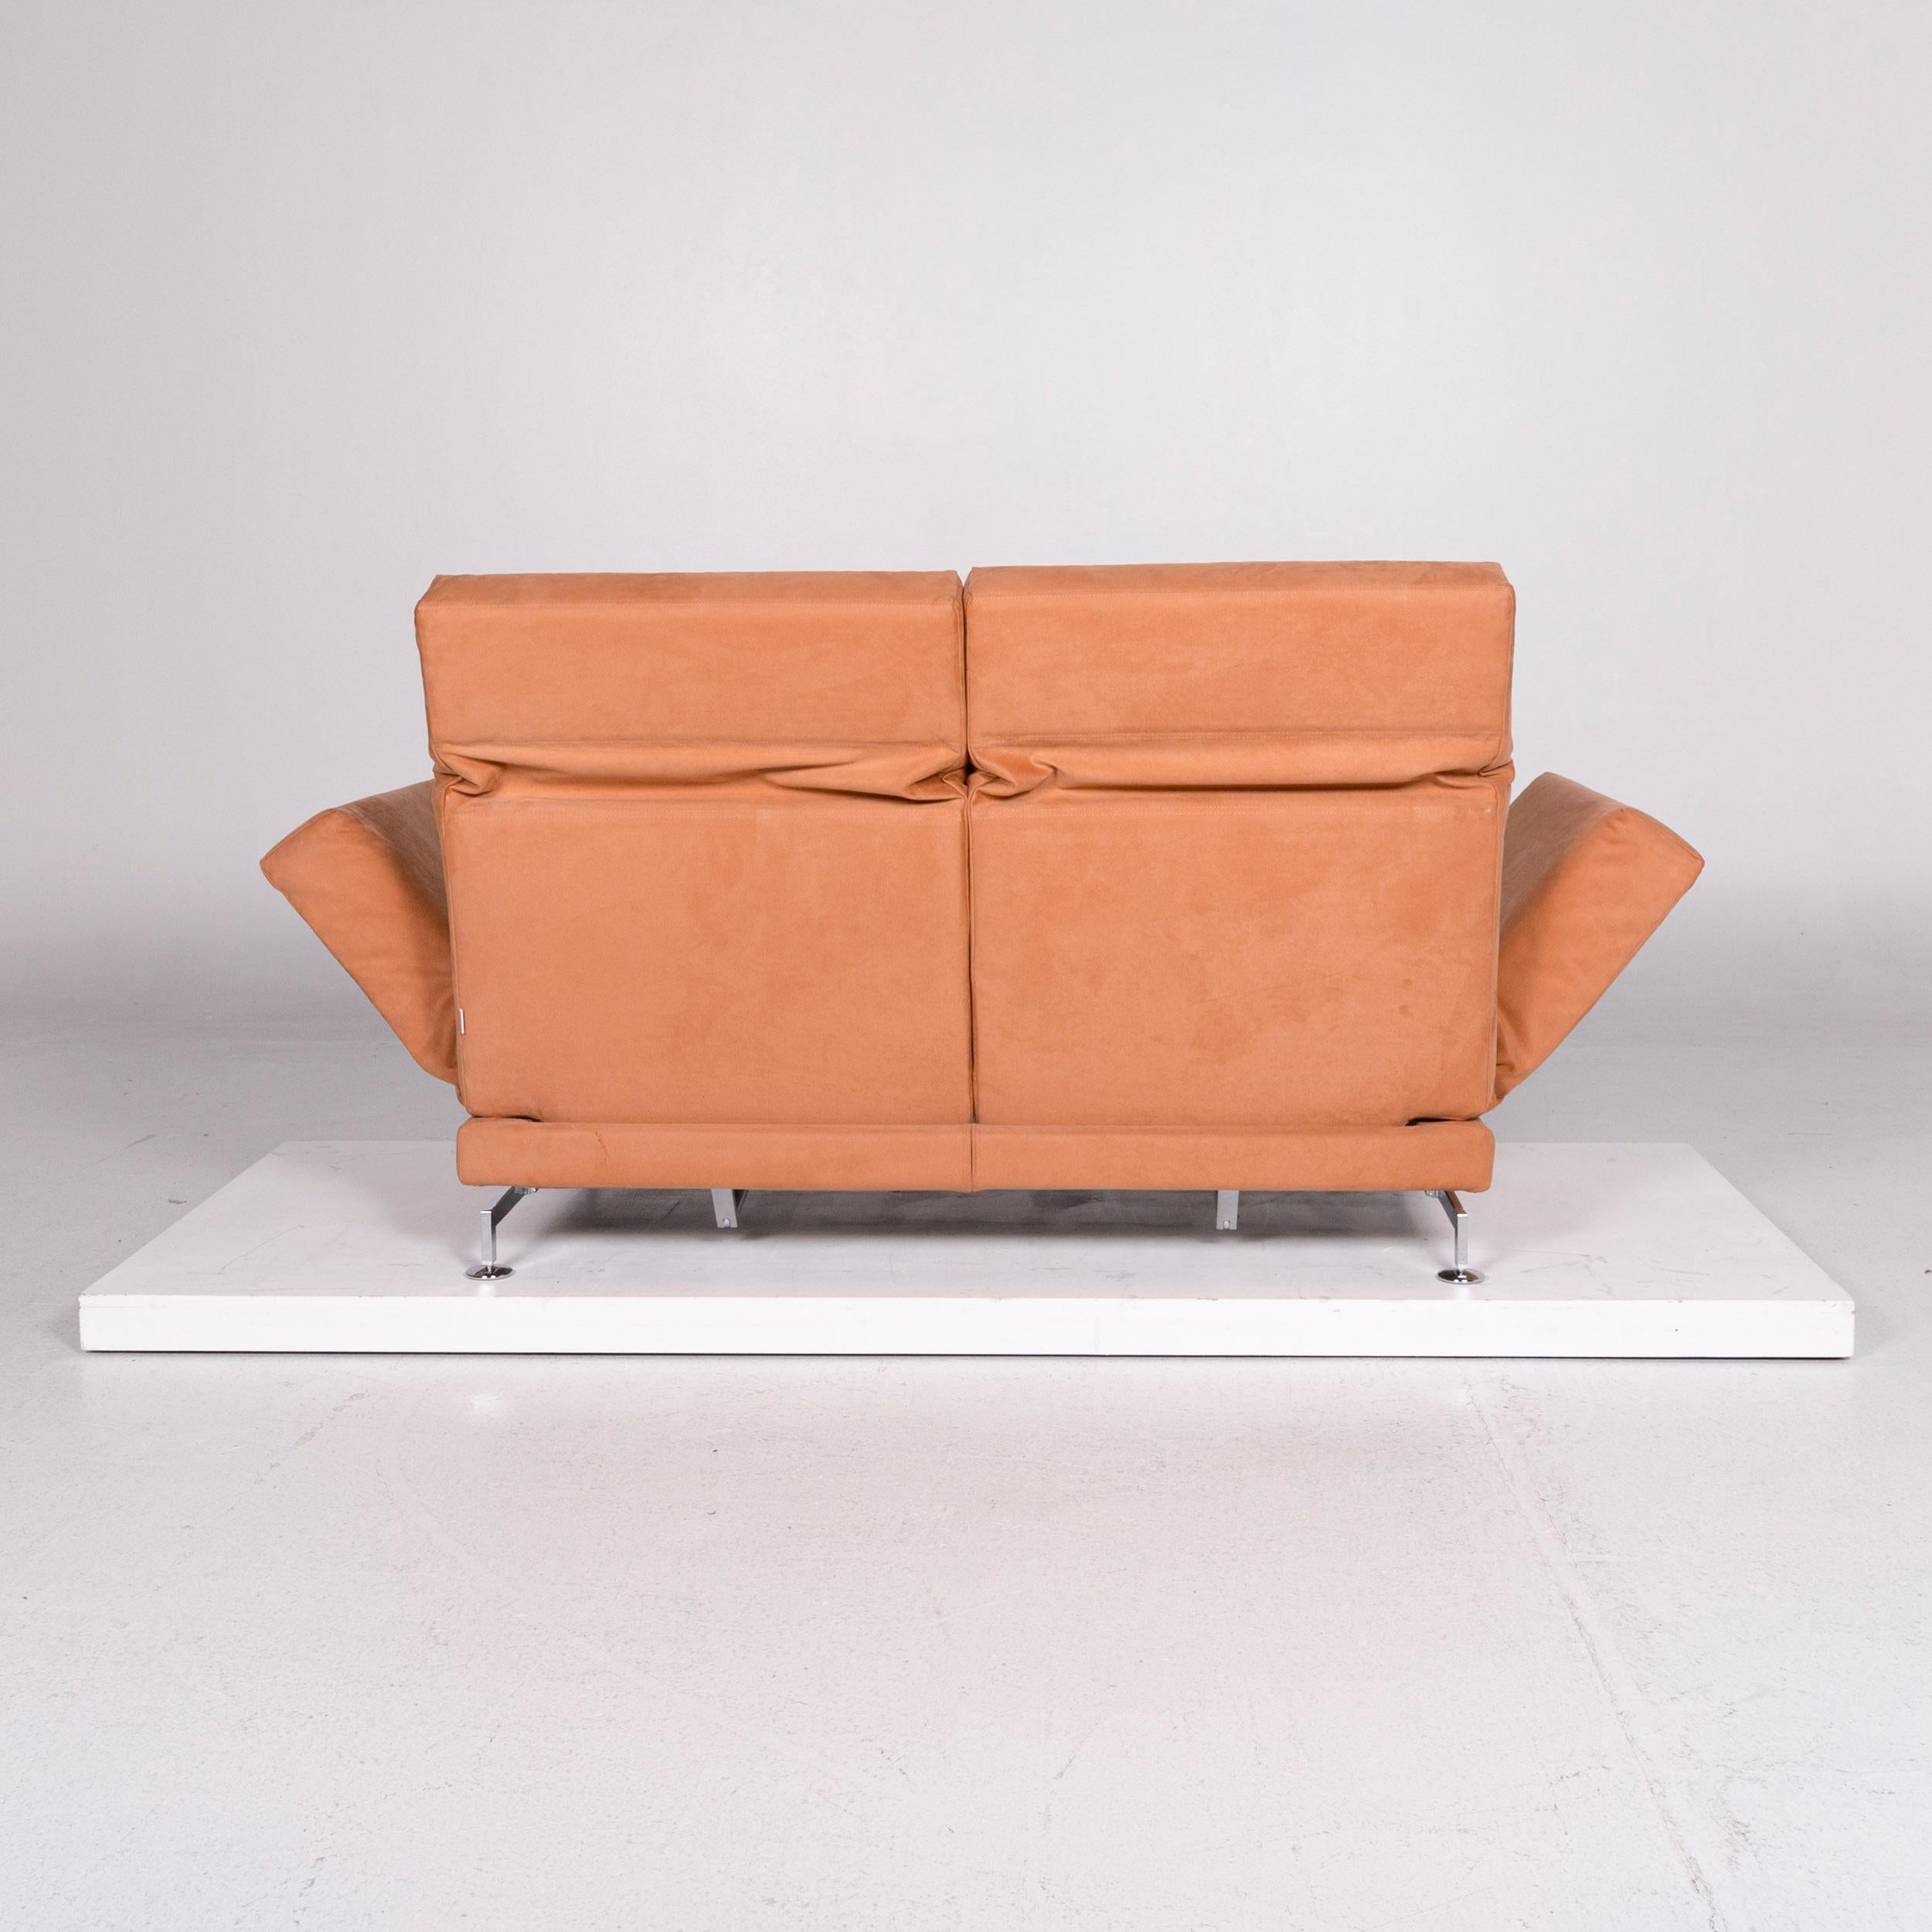 Brühl & Sippold Moule Fabric Sofa Orange Two-Seat Relax Function For Sale 3